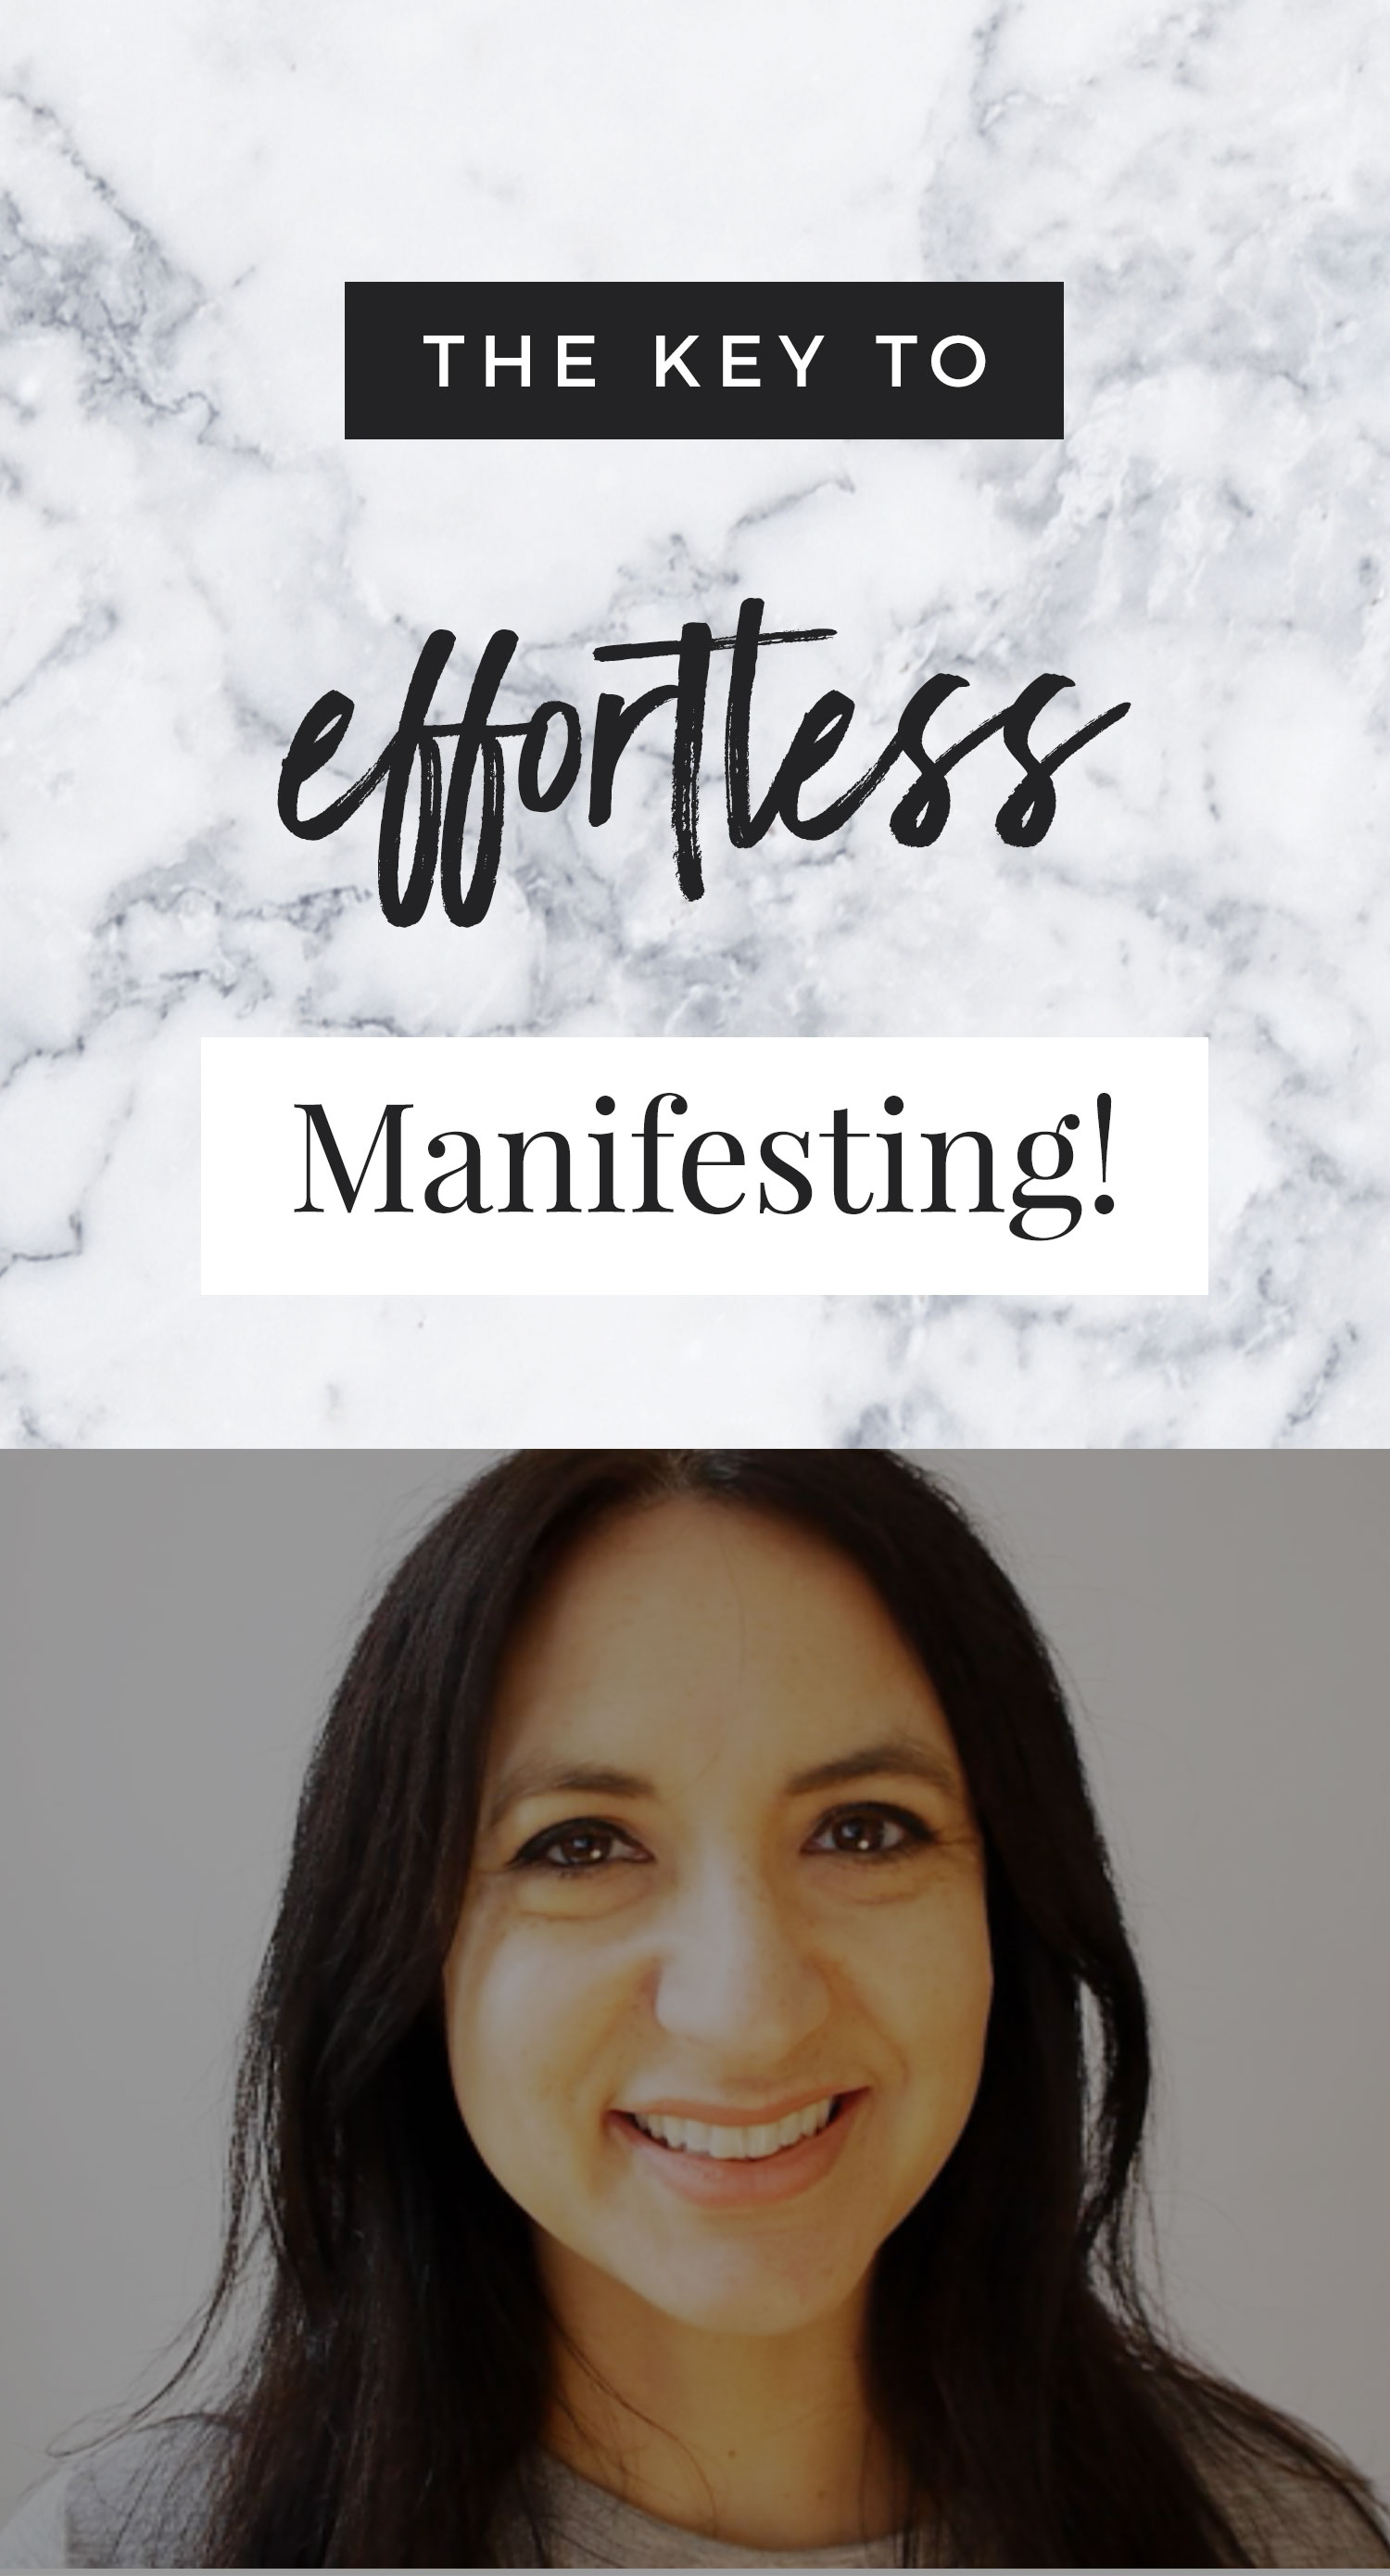 The Key To Effortless Manifesting